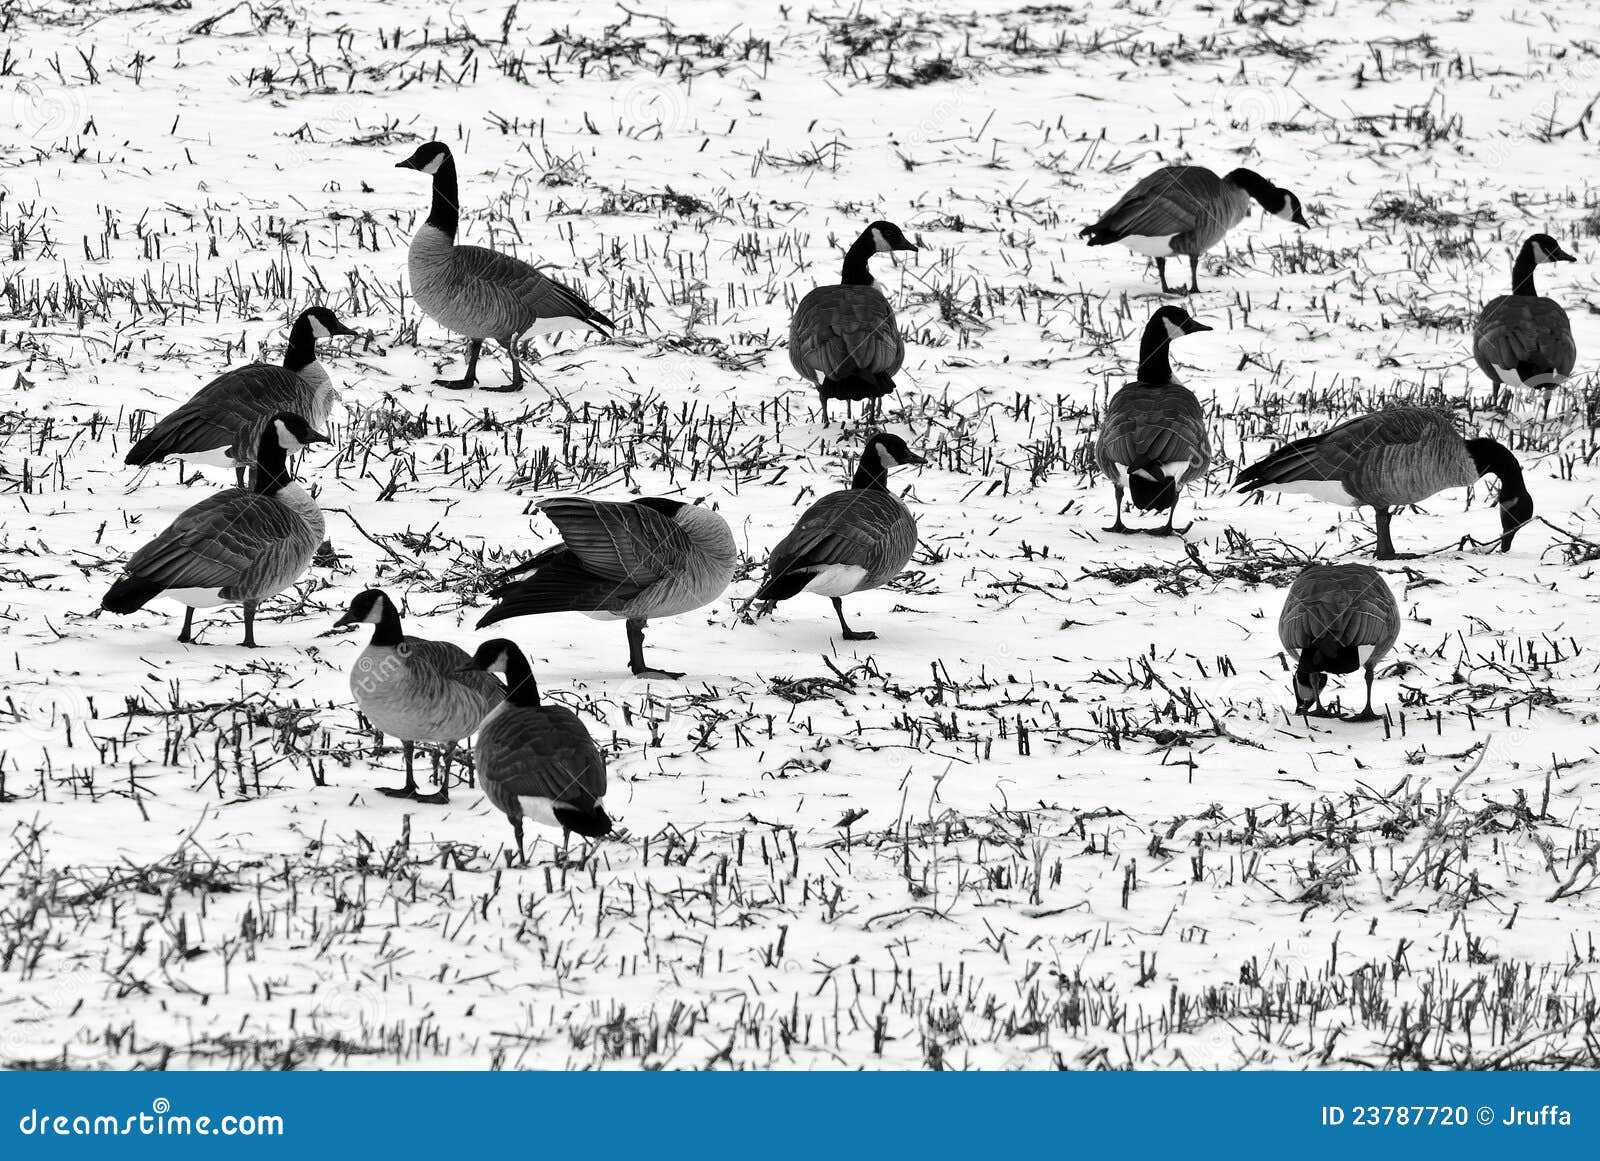 geese in a snow covered field